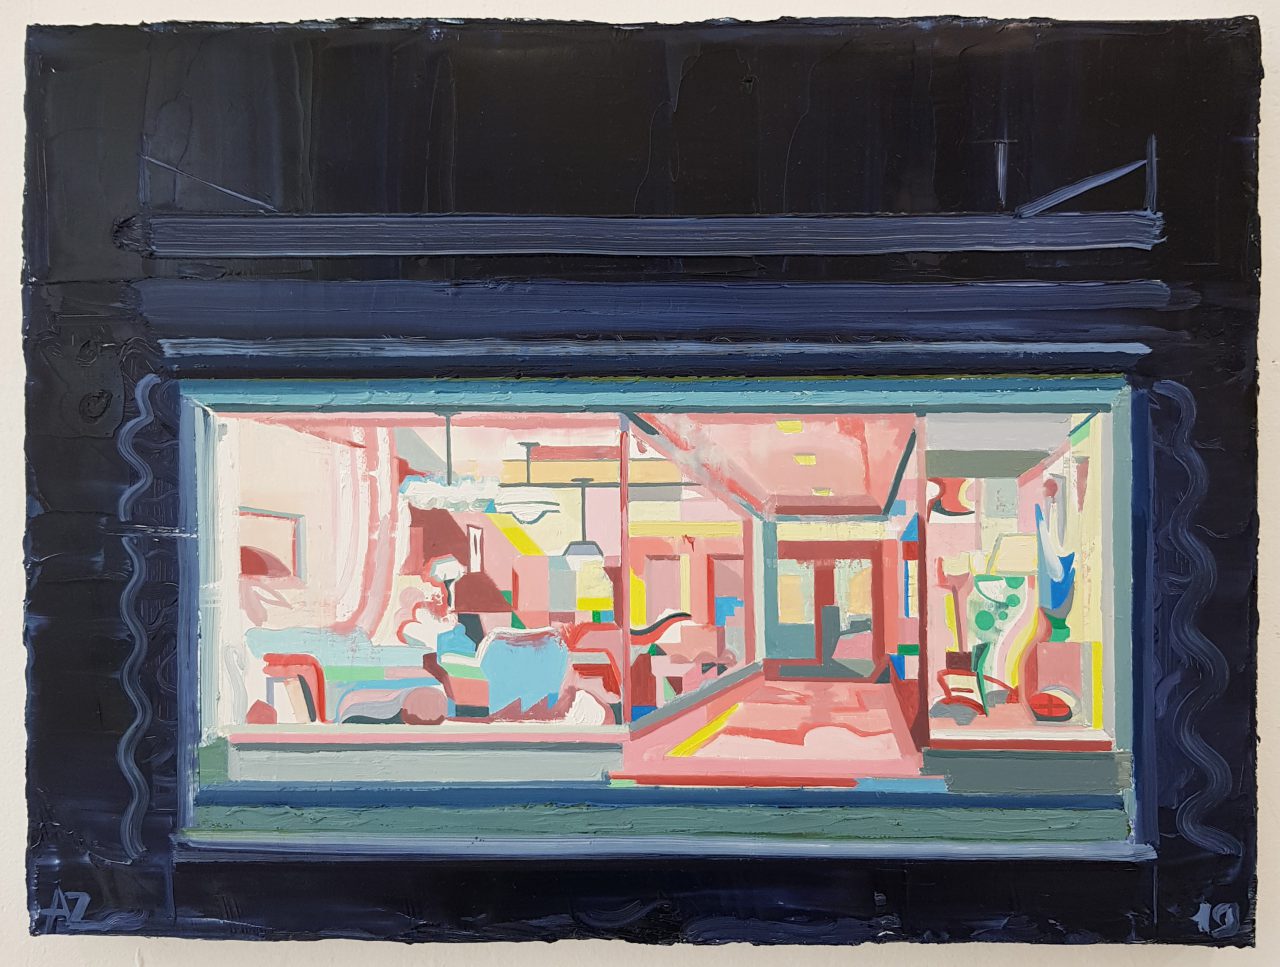 Shop window at night in 1938. Oil on linen, 2019, 30x40cm